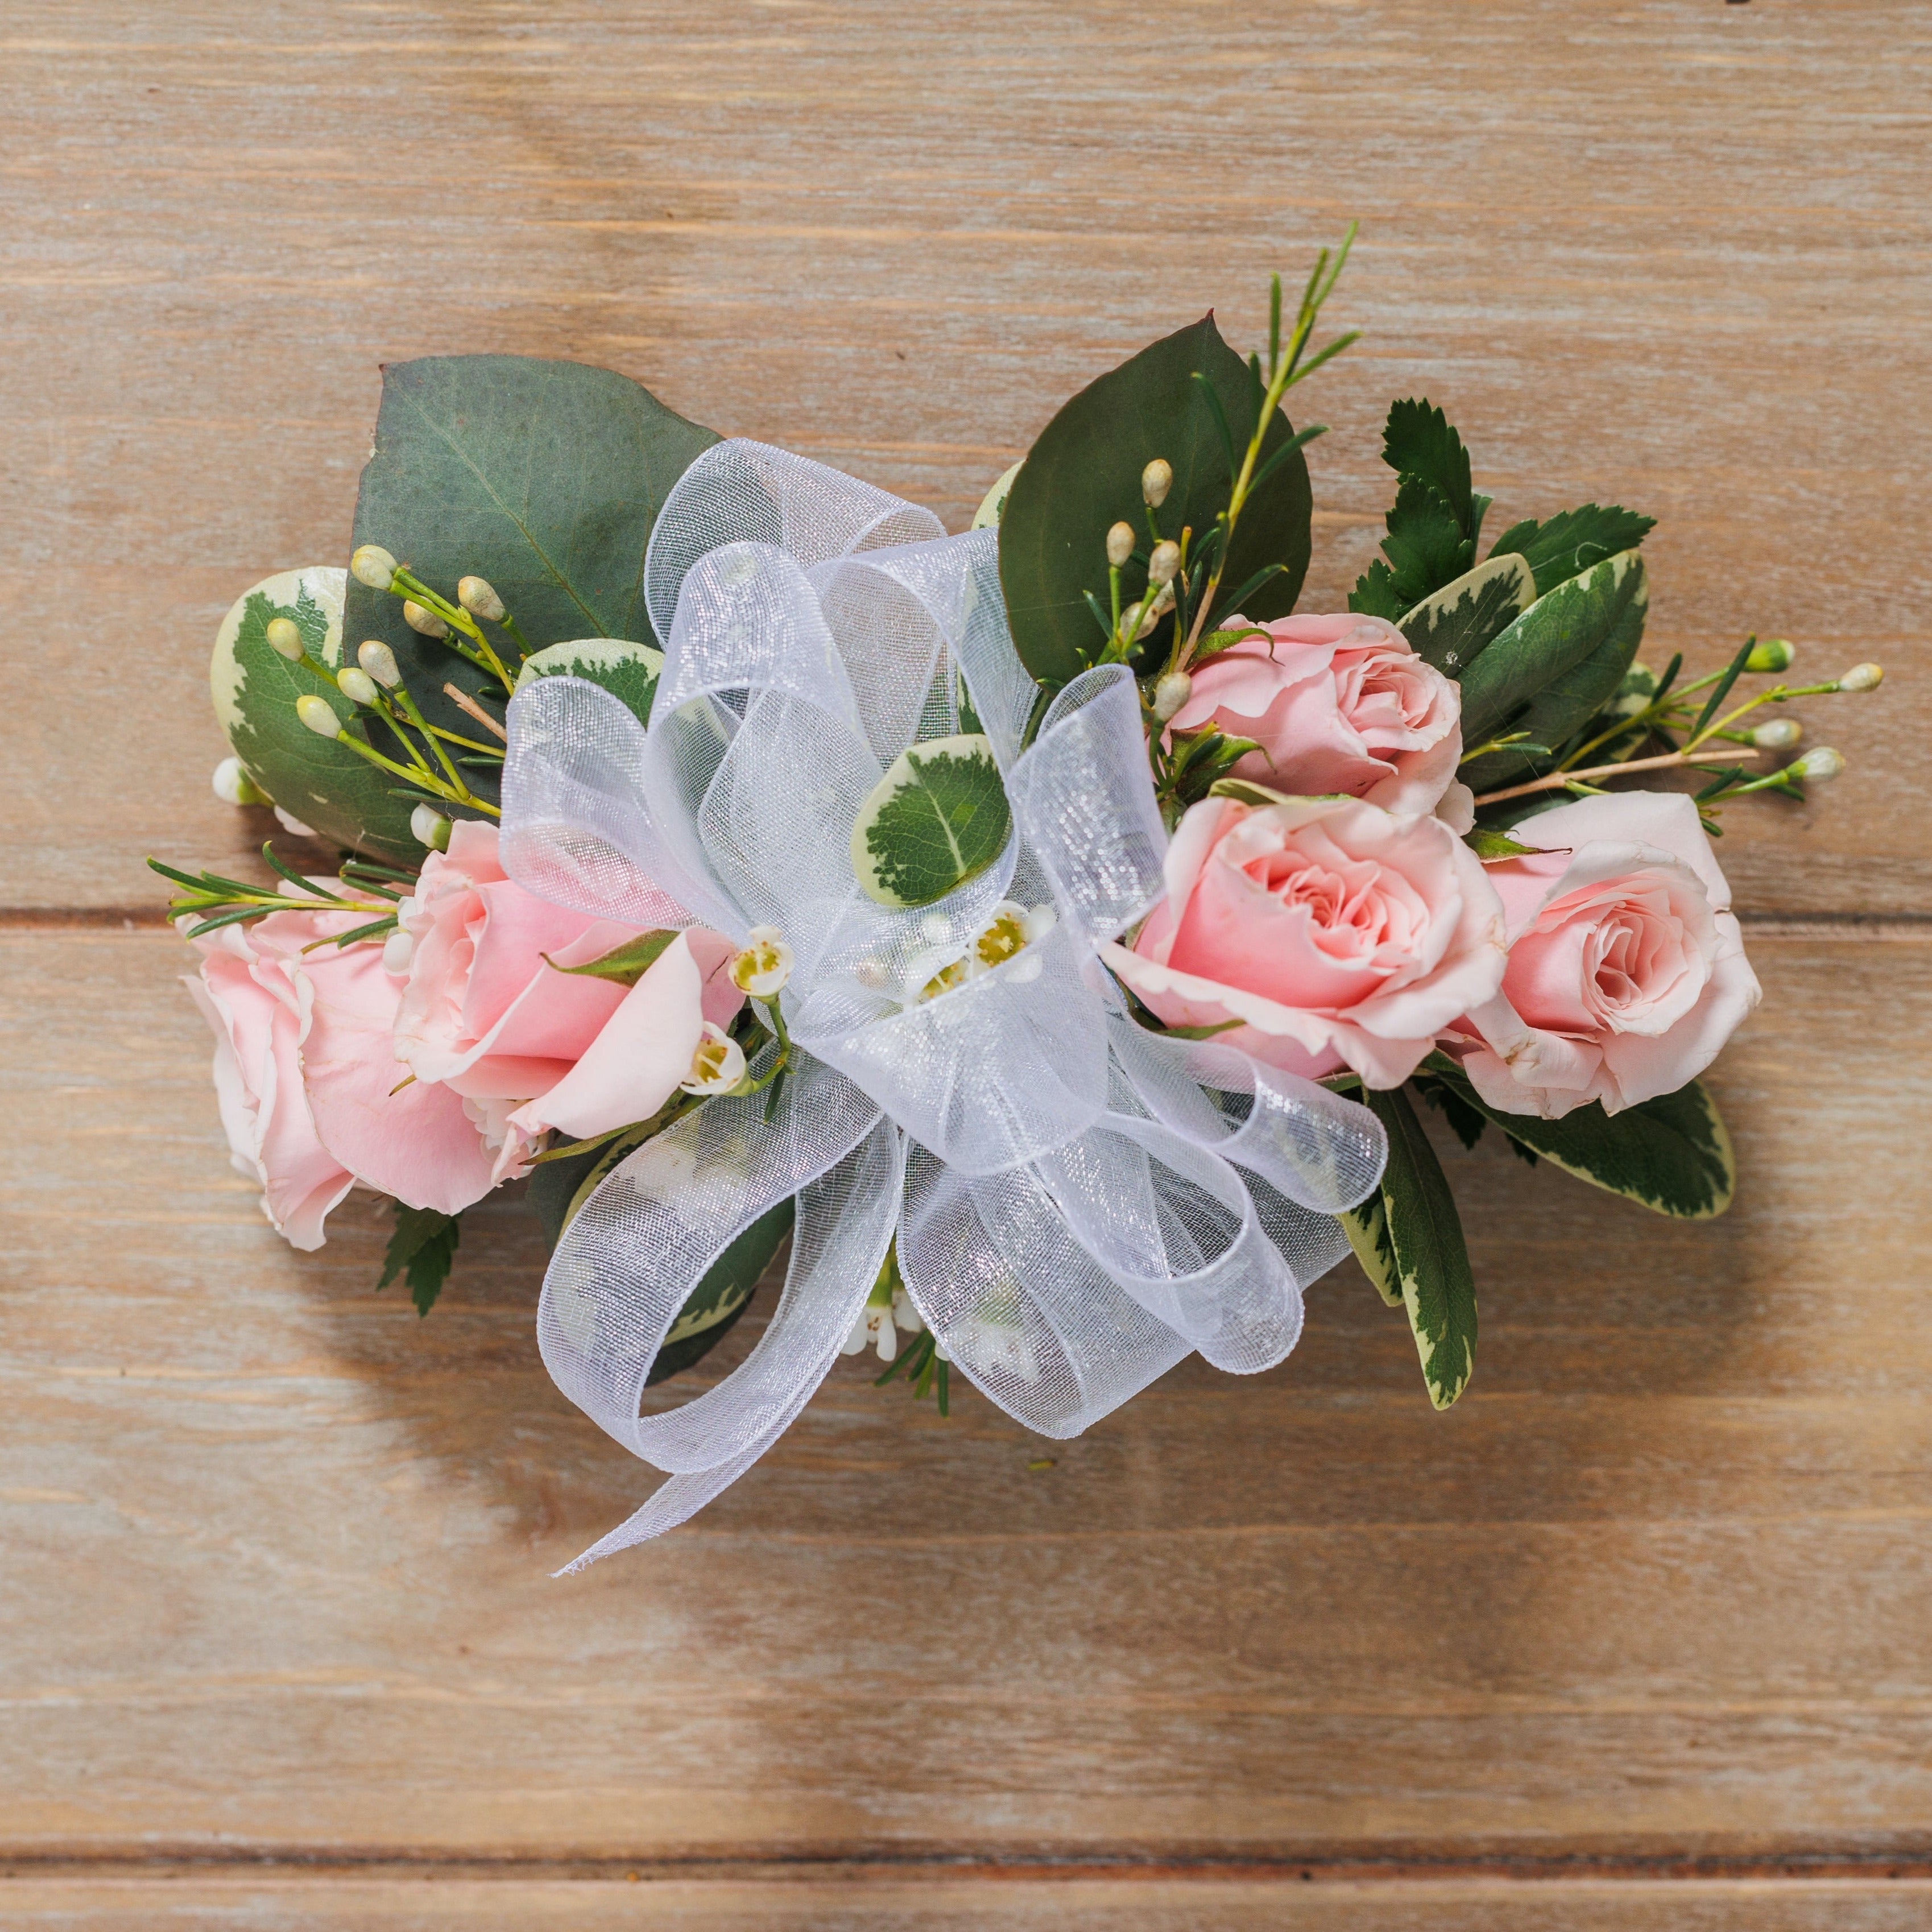 A wrist corsage with light pink spray roses and sheer white ribbon.